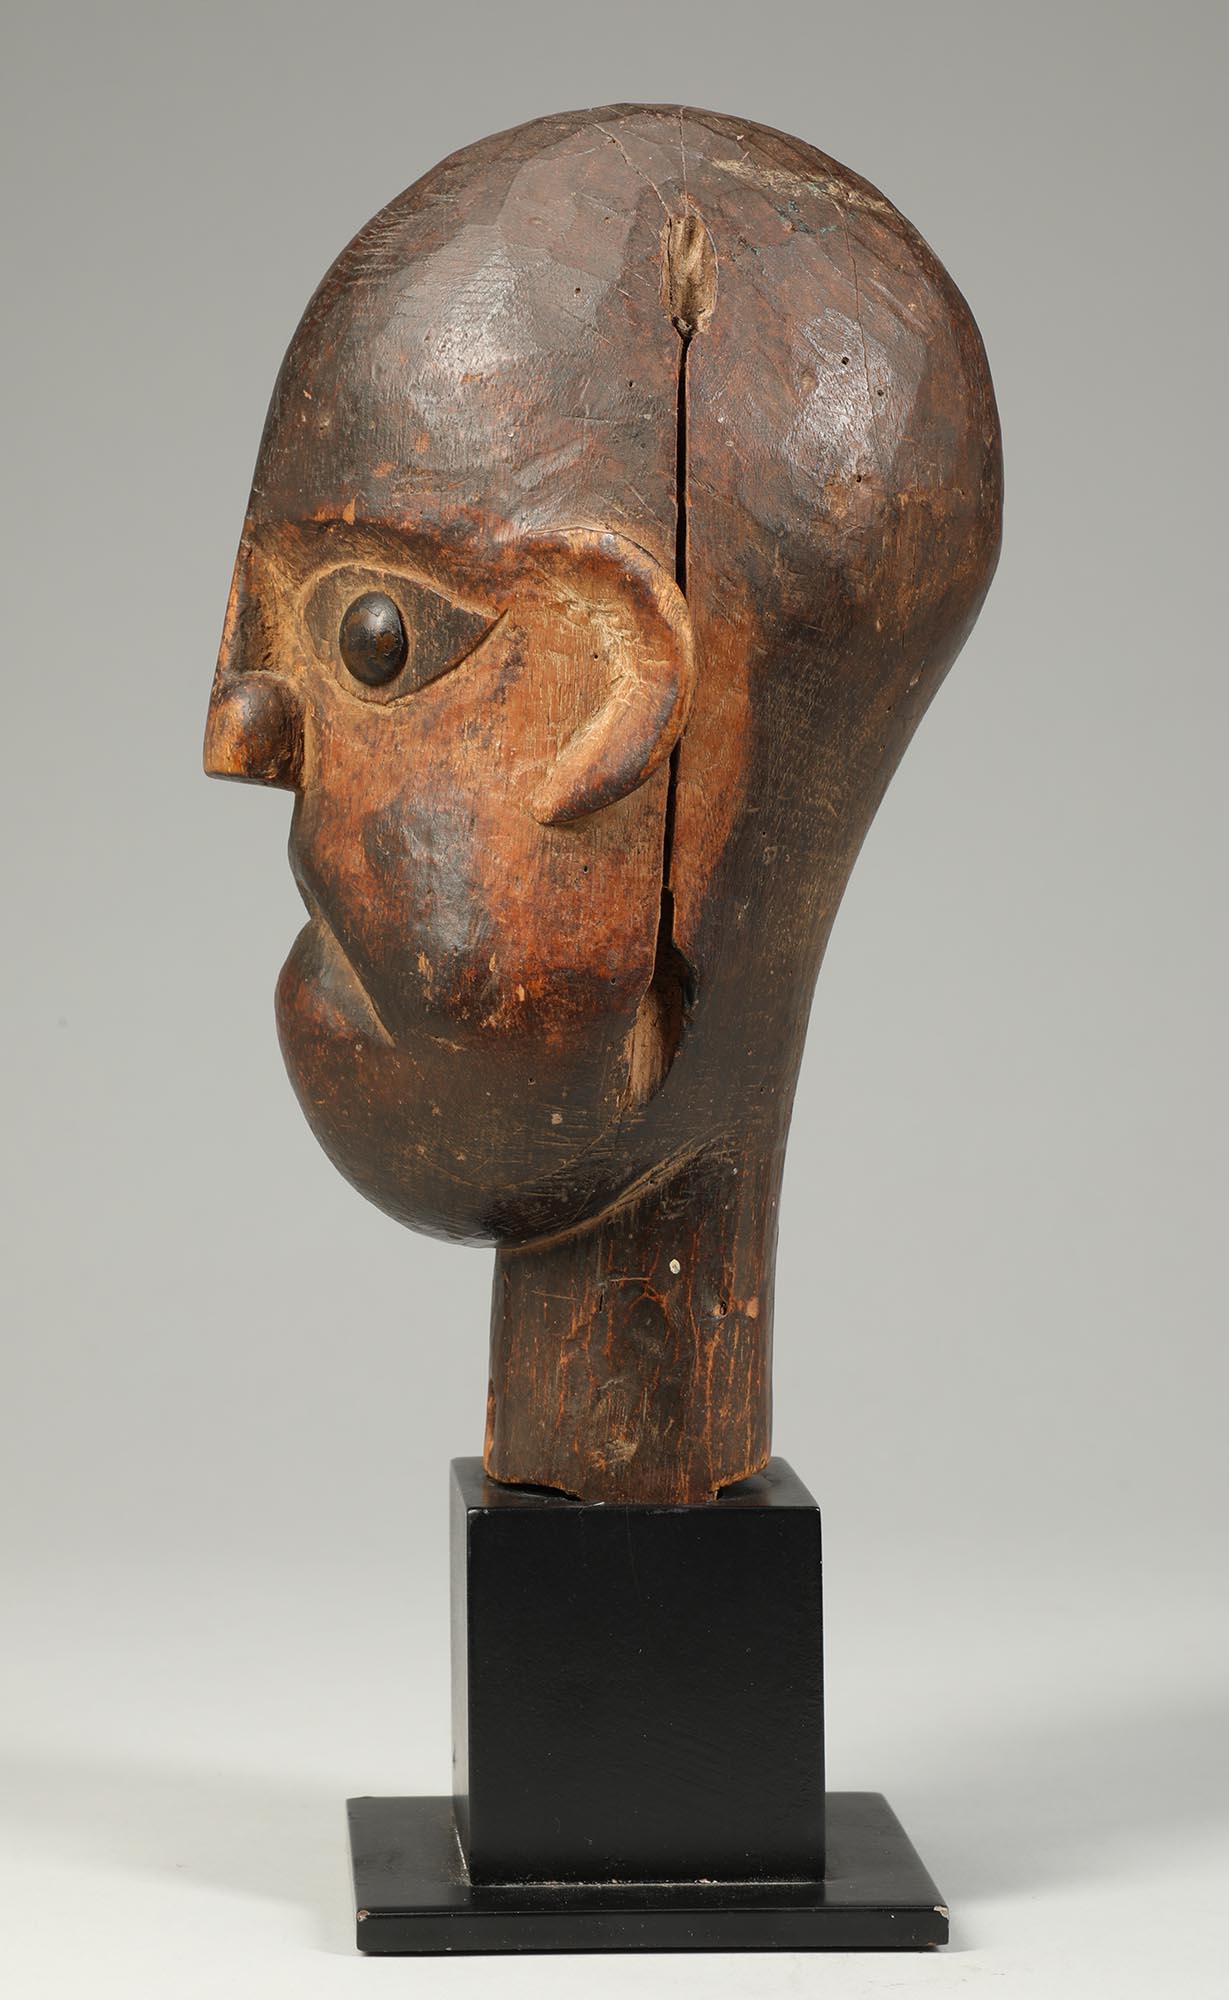 Hand-Carved Cubist Ibibio Puppet Head Brass Eyes Nigeria Early 20th Century stern gaze stand For Sale